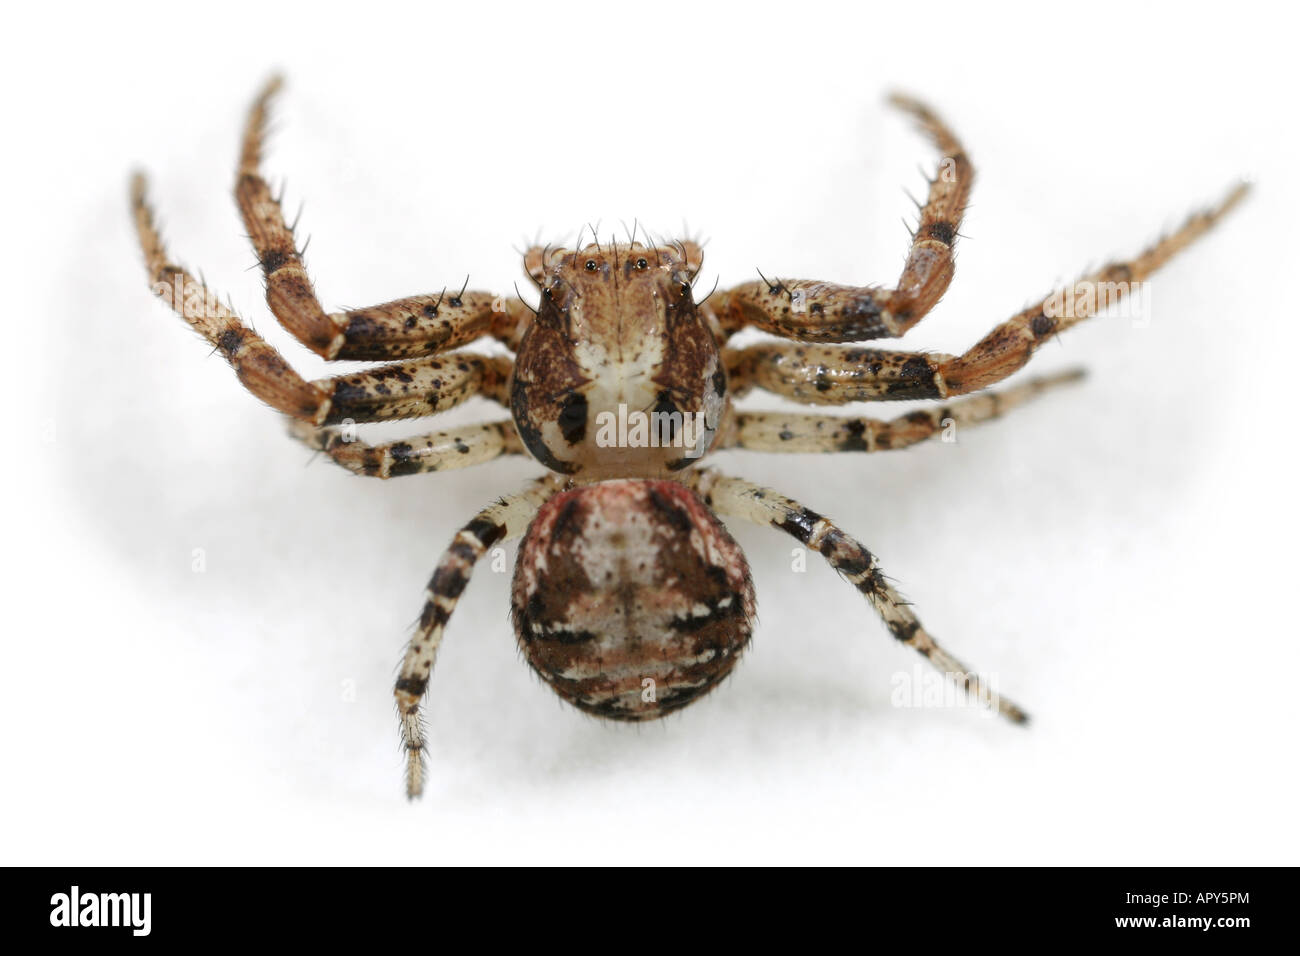 A female Crab spider - Xysticus audax. Thomisidae family.  On white background. Stock Photo